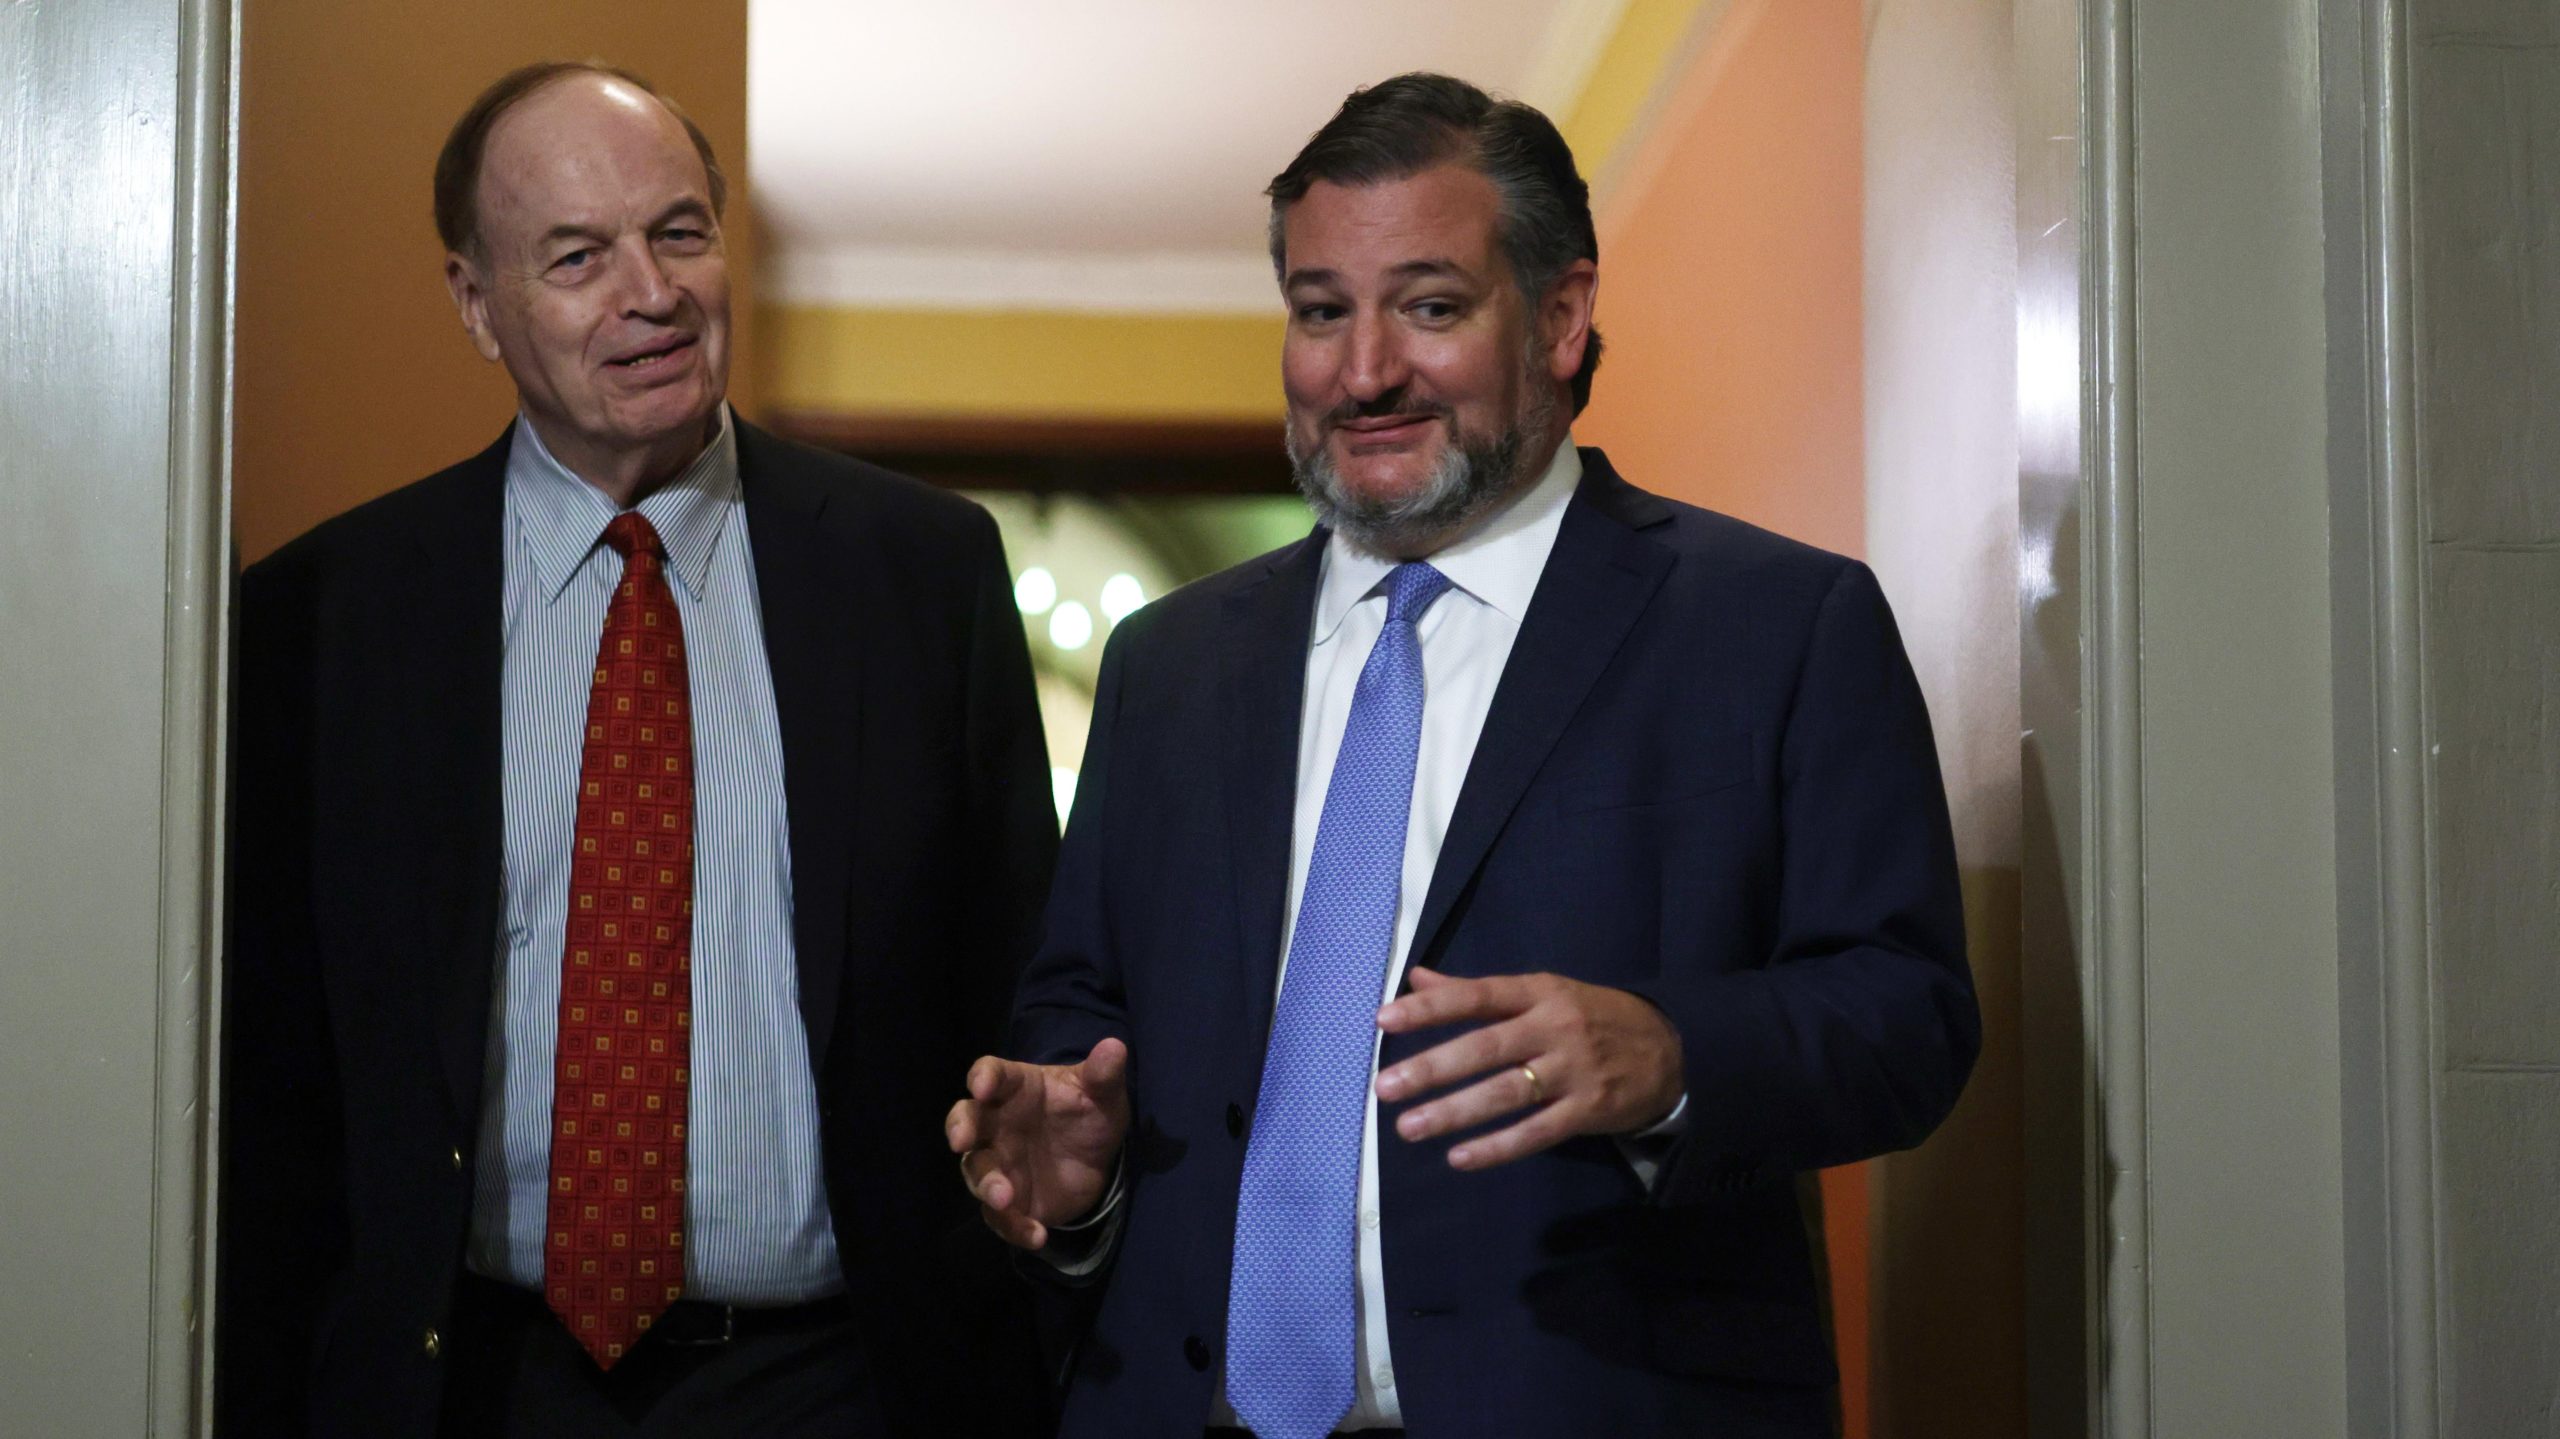 Alabama Senator Richard Shelby, left, and Texas Senator Ted Cruz, right, leaving a Senate GOP conference meeting at the Capitol on Oct. 7, 2021. (Photo: Alex Wong, Getty Images)